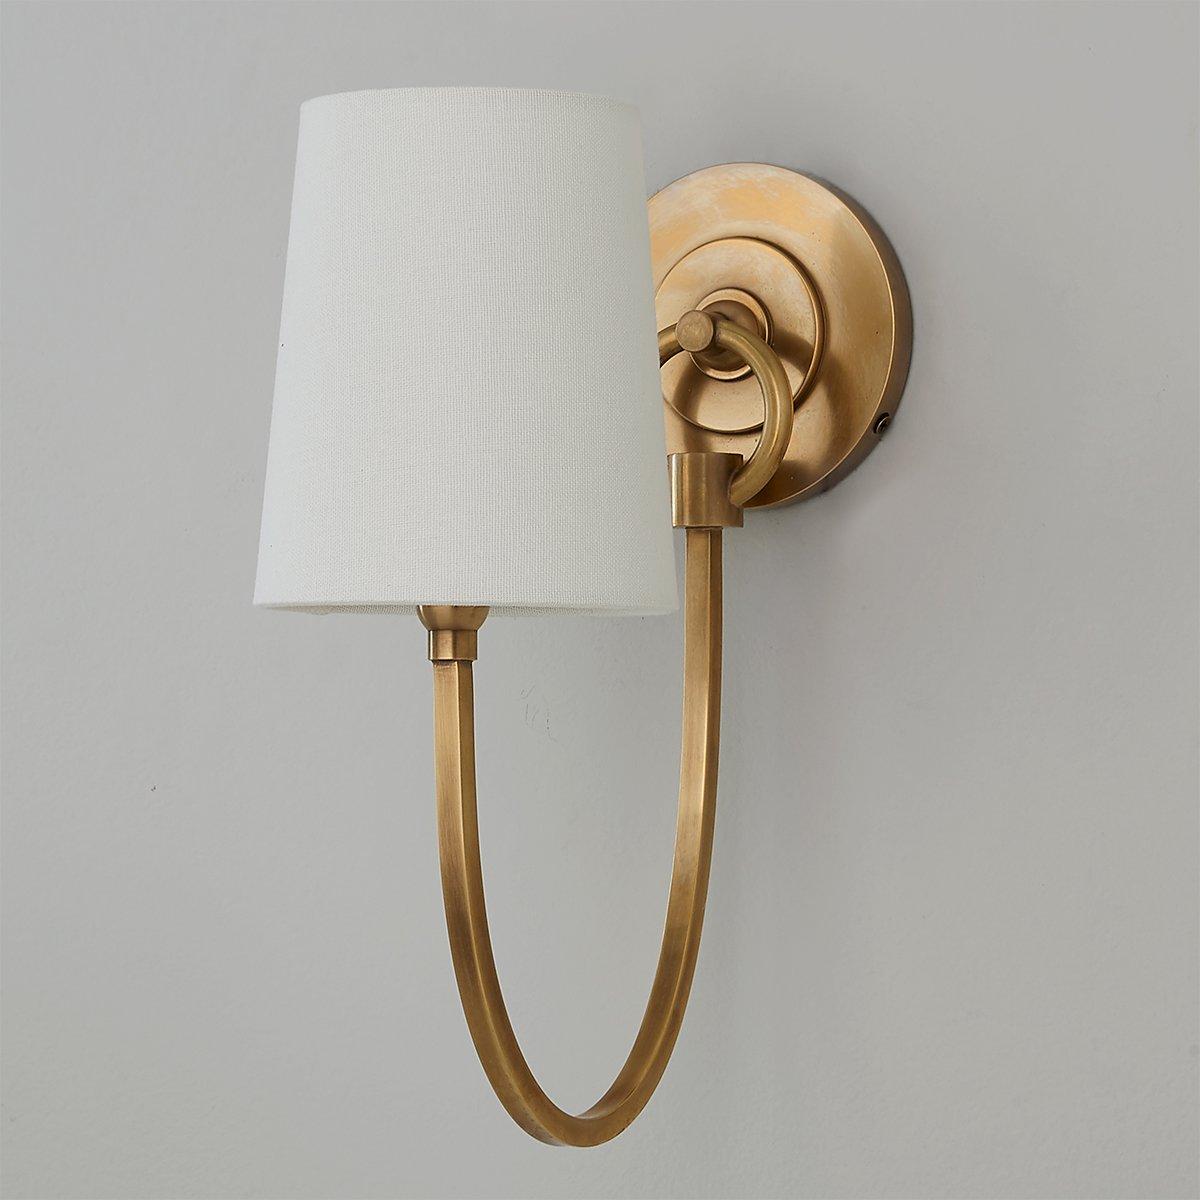 AERIN Brenta Single Sconce in Hand-Rubbed Antique Brass with White Gla